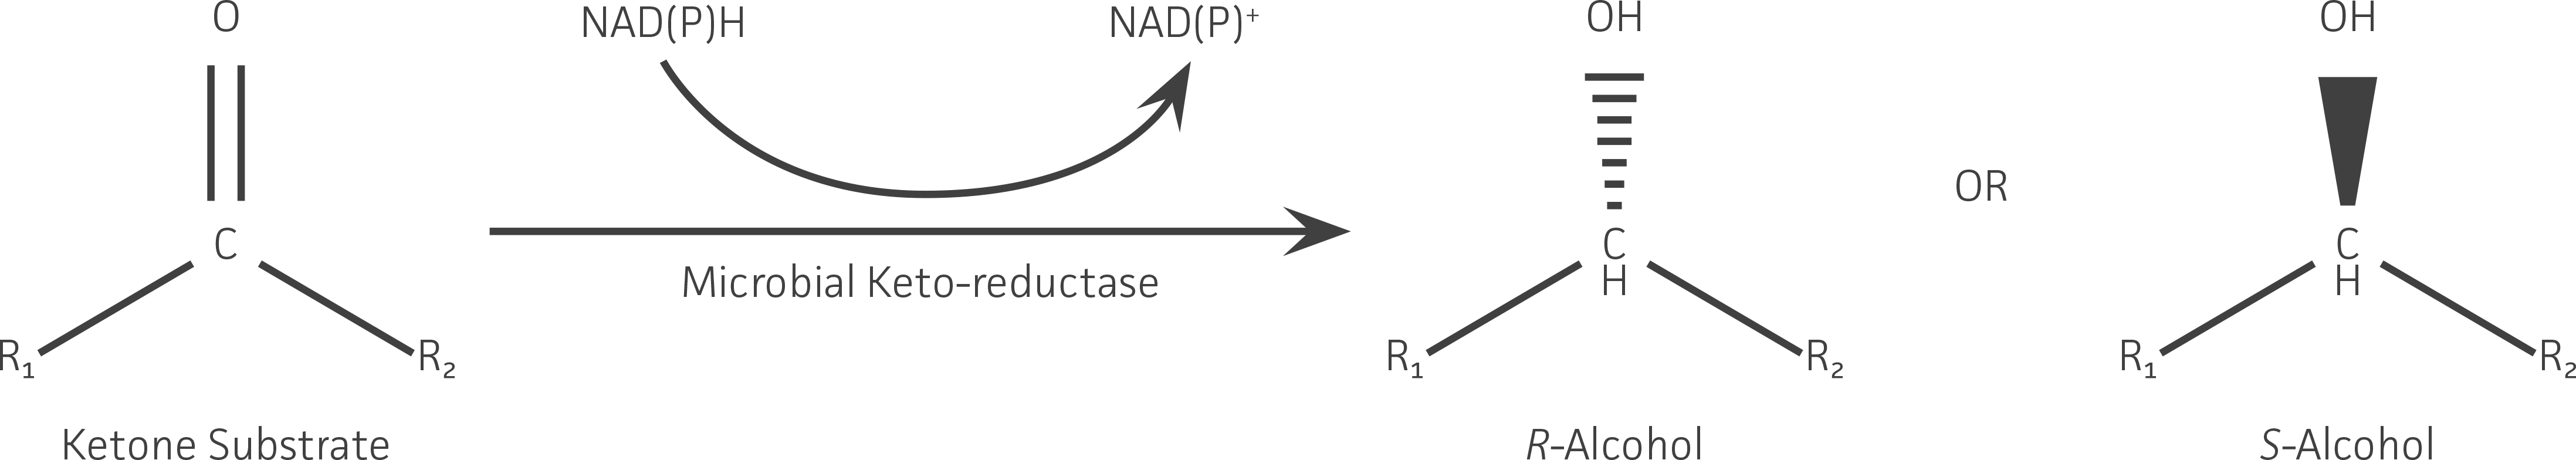 Figure 1 - ATCC Strains with Demonstrated Biocatalytic Ketone Reduction Capability